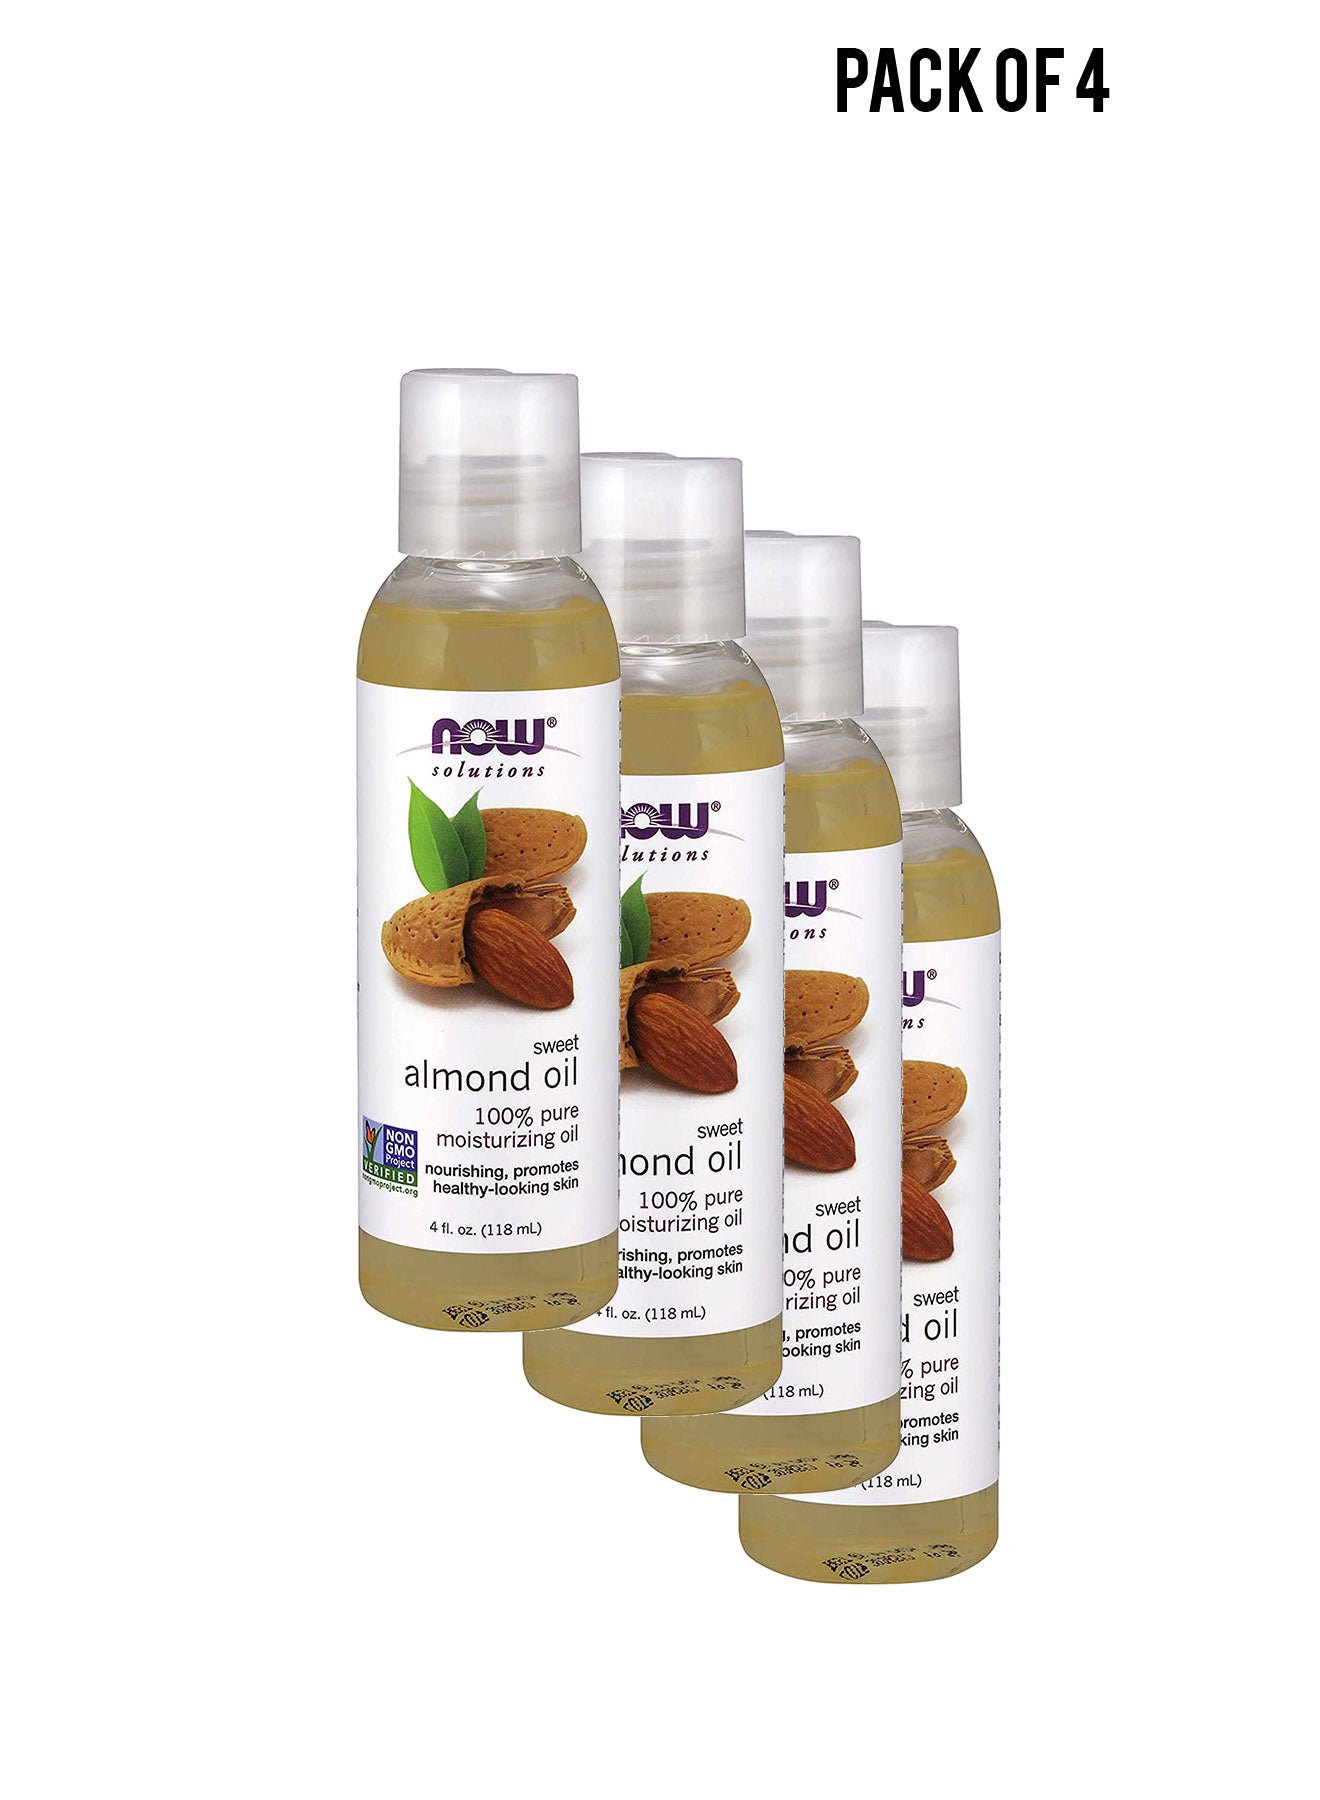 NOW Solutions Almond Oil Sweet 4 oz118ml Value Pack of 4 